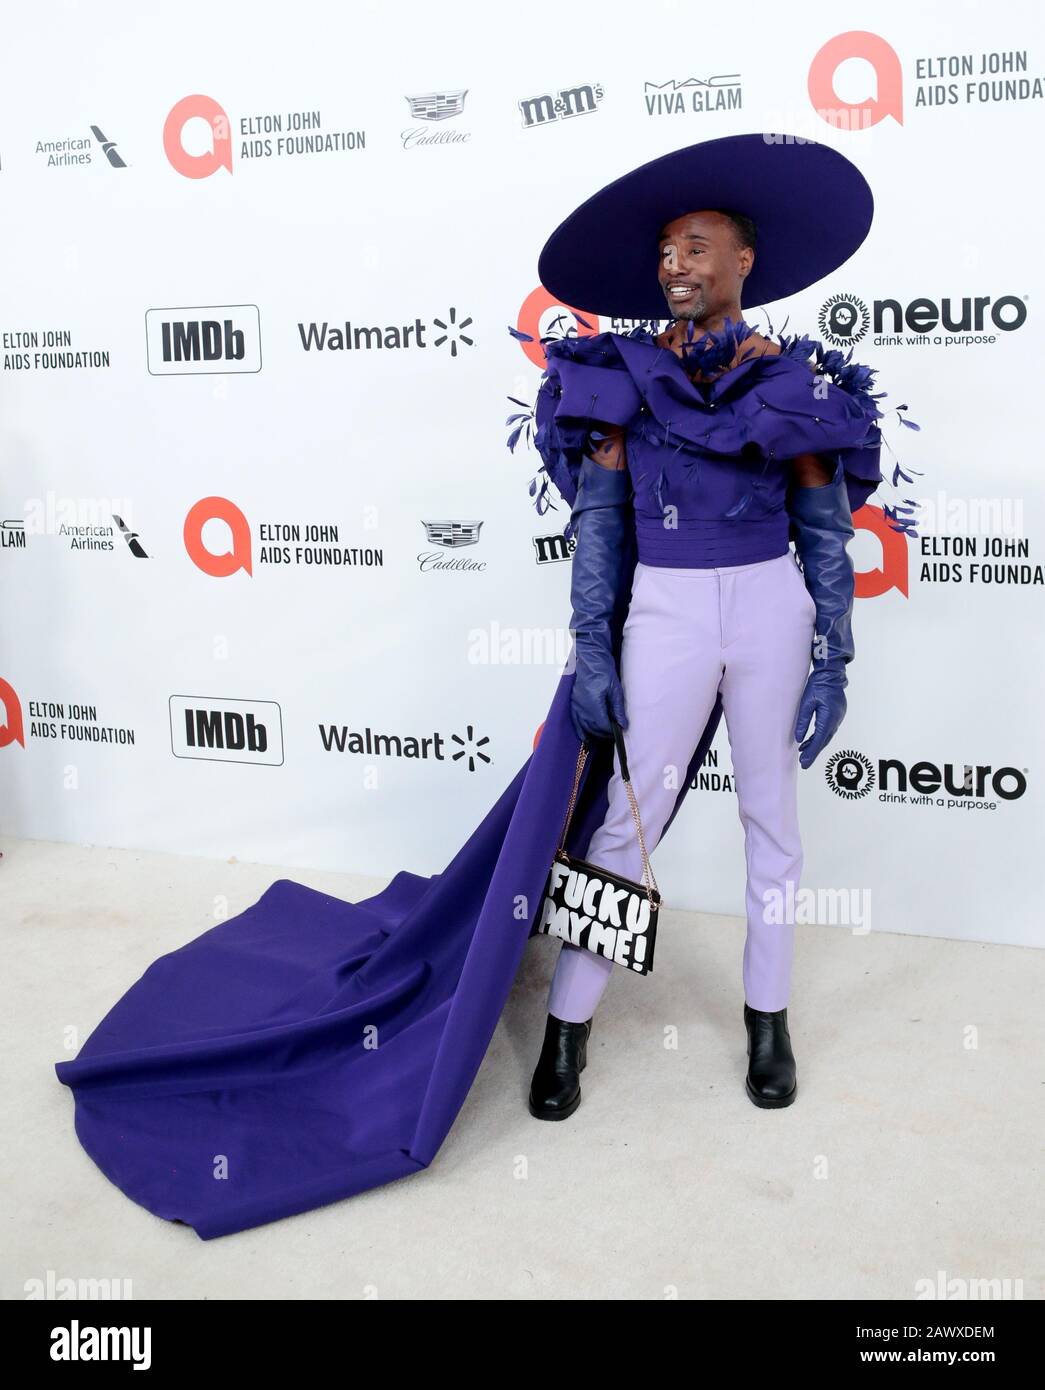 Billy Porter attending the Elton John AIDS Foundation Viewing Party held at West Hollywood Park, Los Angeles, California, USA. Stock Photo